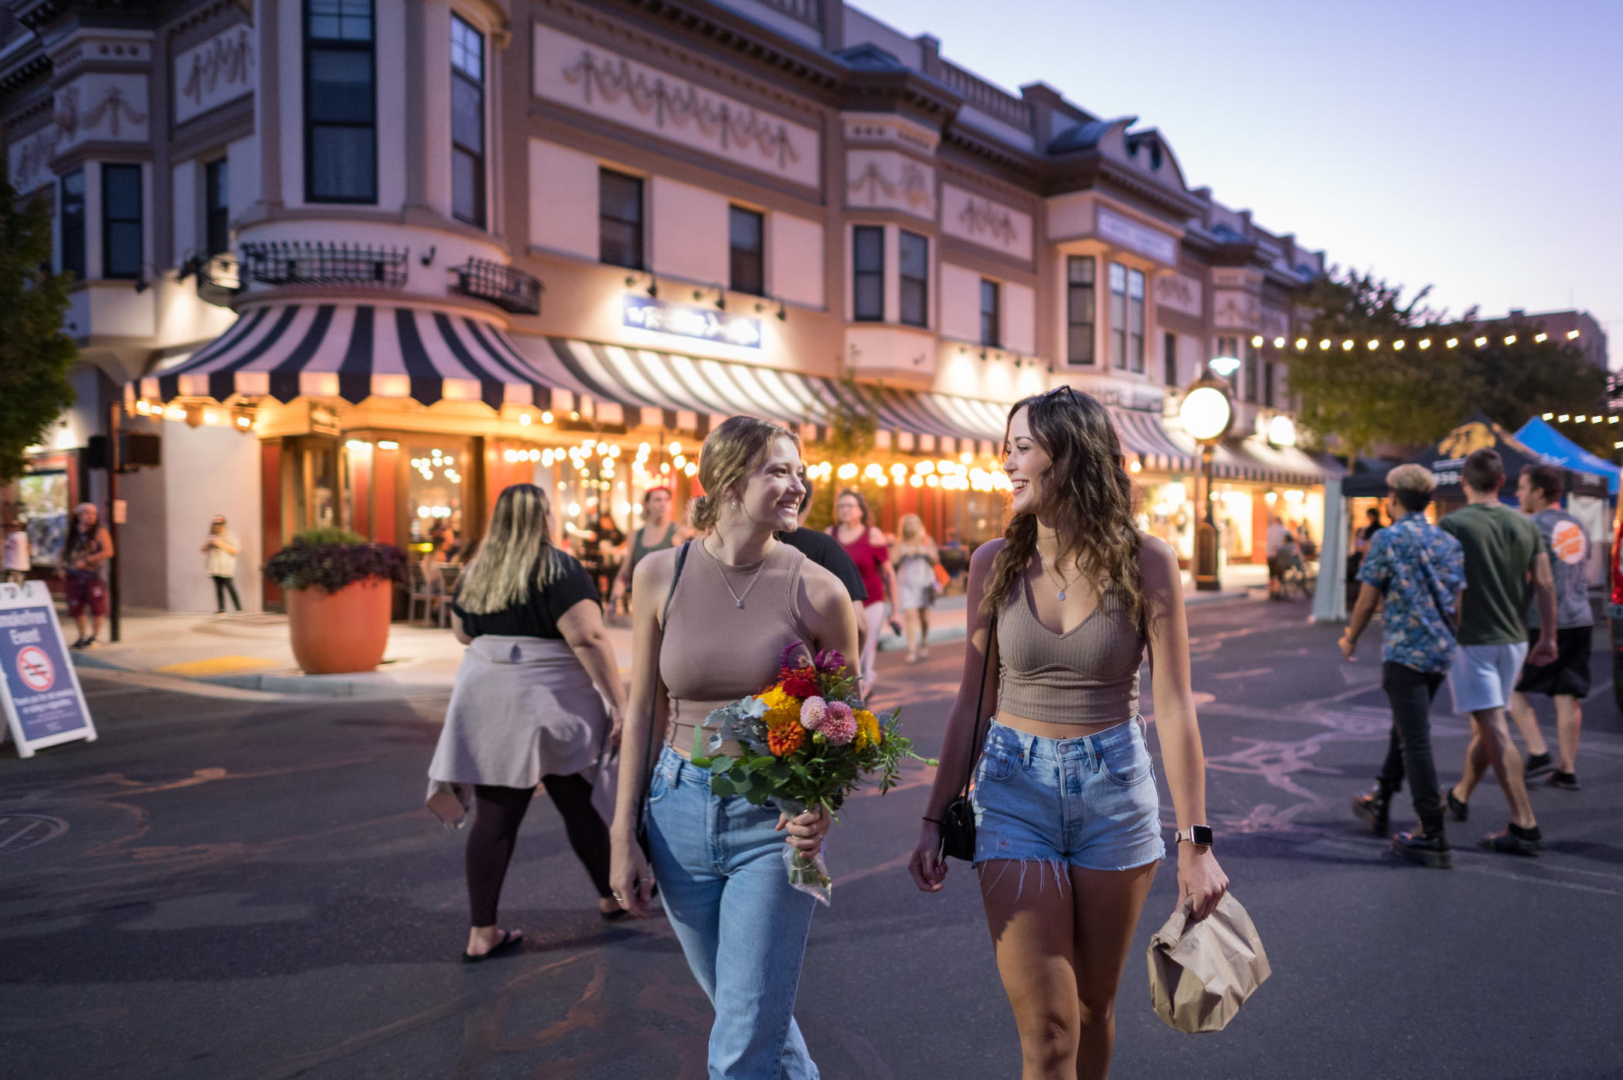 Two students walking in the street during an evening farmers market. One students hold a bouquet of colorful flowers in one hand and the other student holds a paper bag.